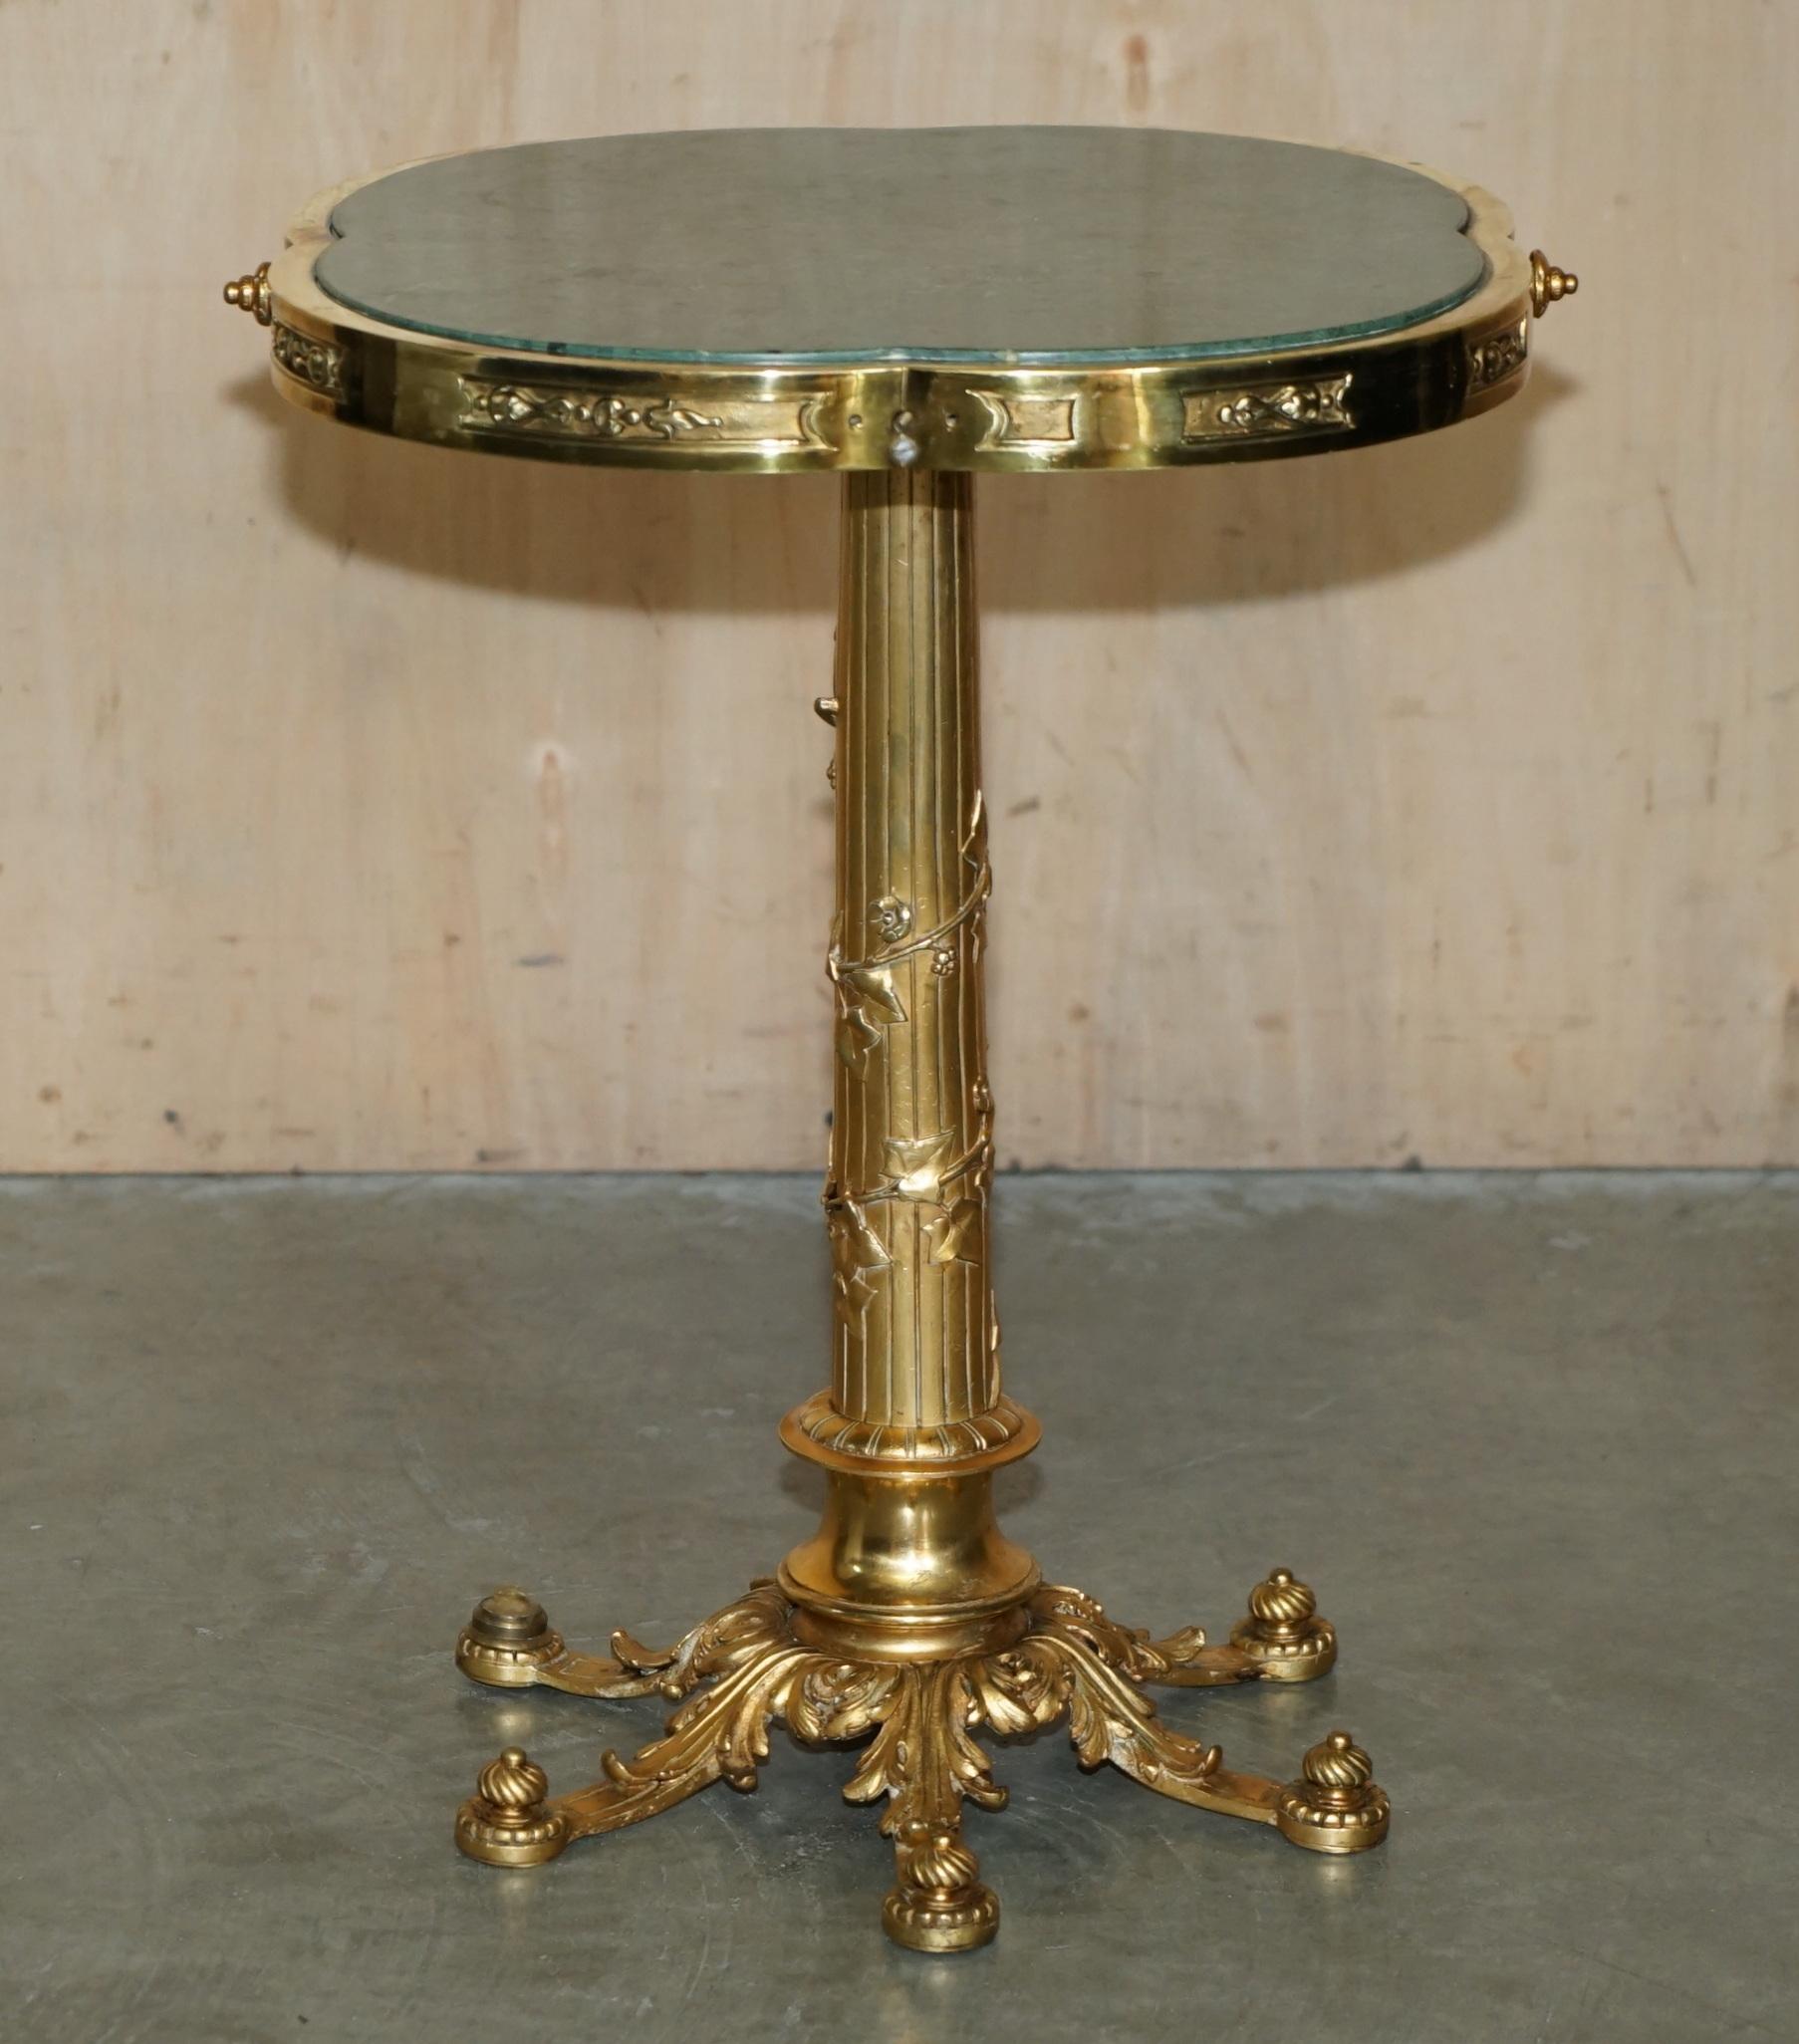 Royal House Antiques

Royal House Antiques is delighted to offer for sale this really quite rare, super decorative circa 1900 solid brass side table with thick green Italian Marble top

Please note the delivery fee listed is just a guide, it covers